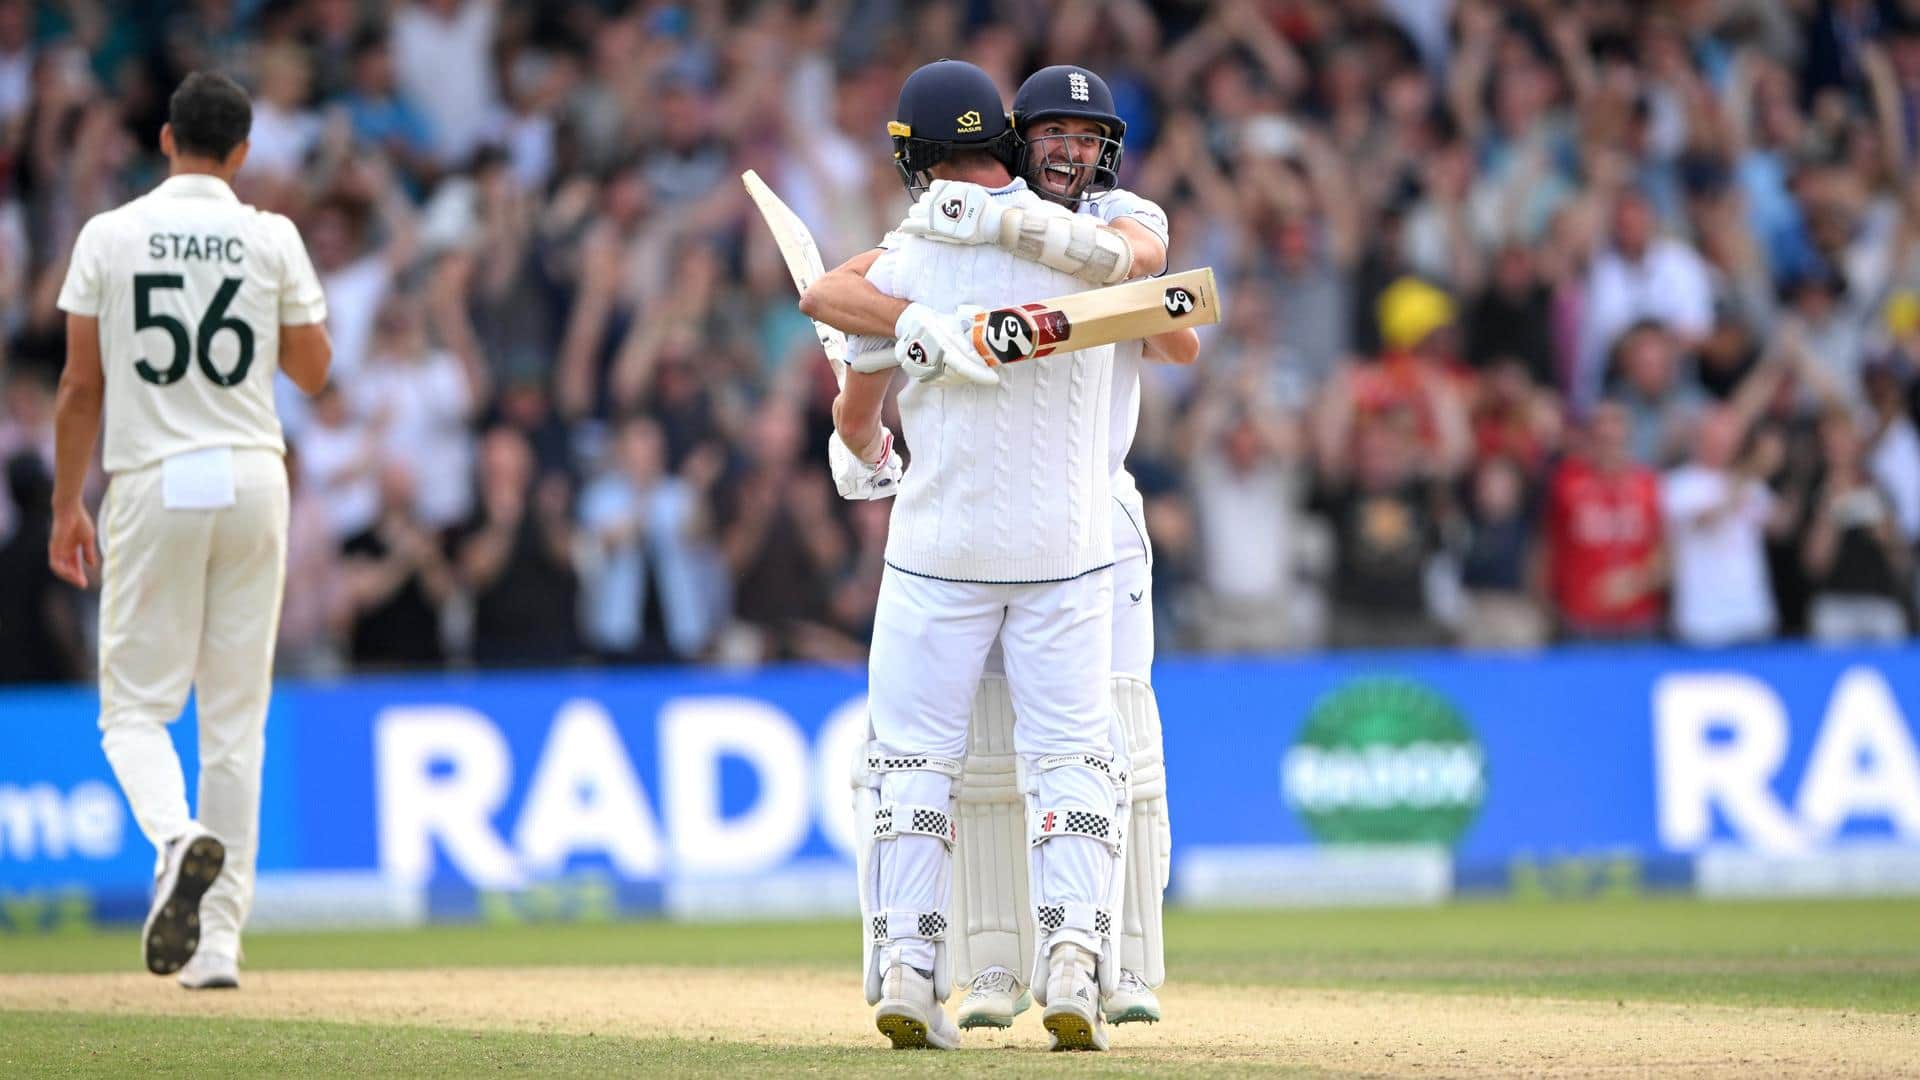 England stay alive in Ashes with win at Headingley: Takeaways